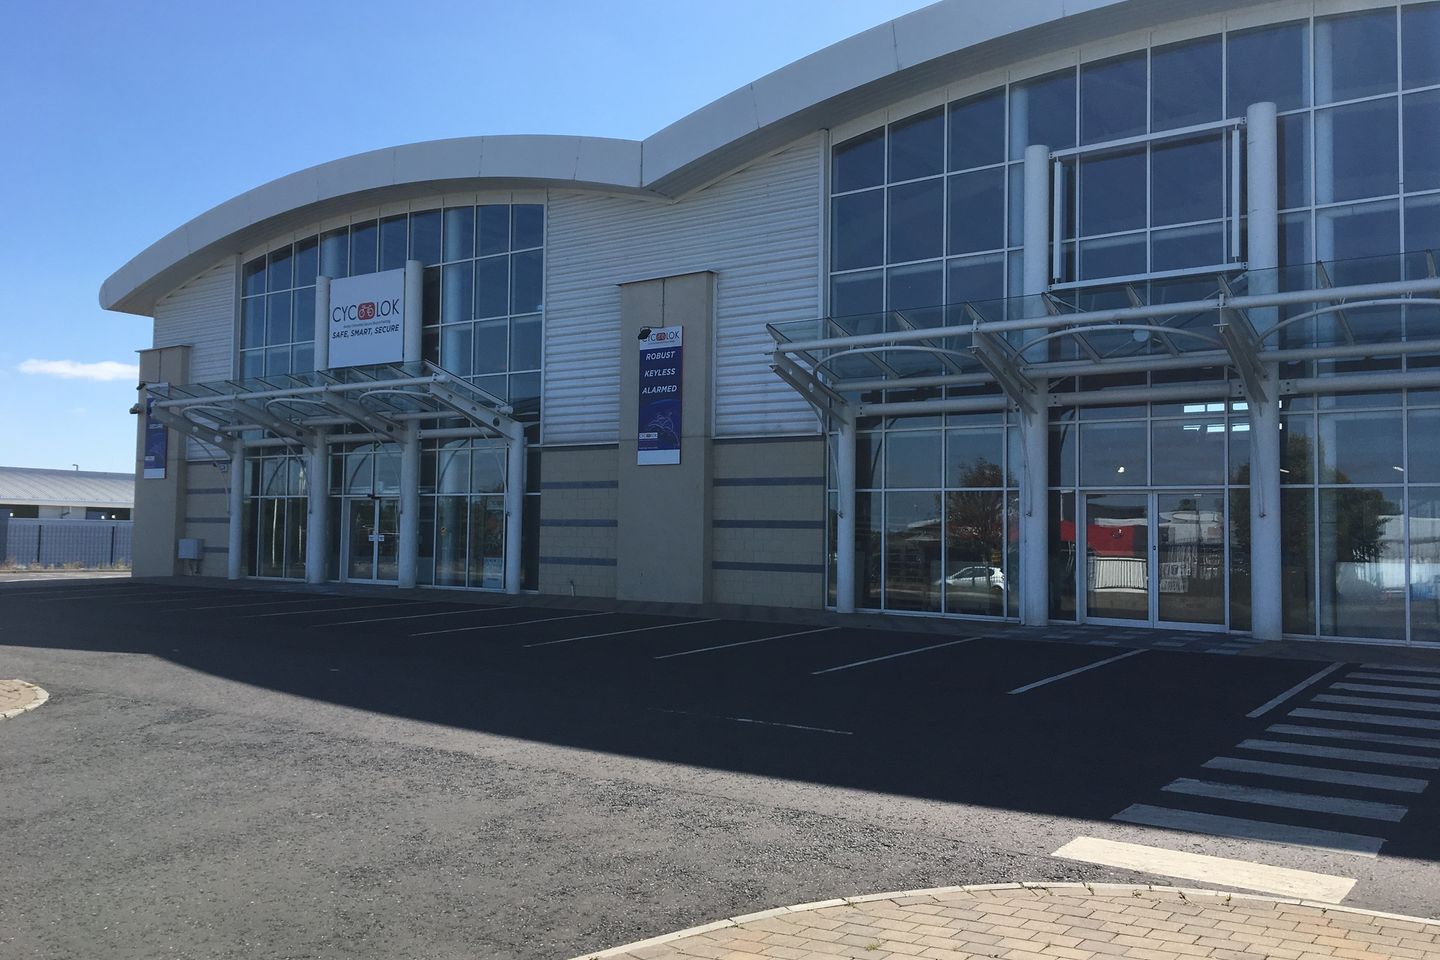 Unit 15, Barrow Valley Retail Park, Carlow Town, Carlow Town, Co. Carlow